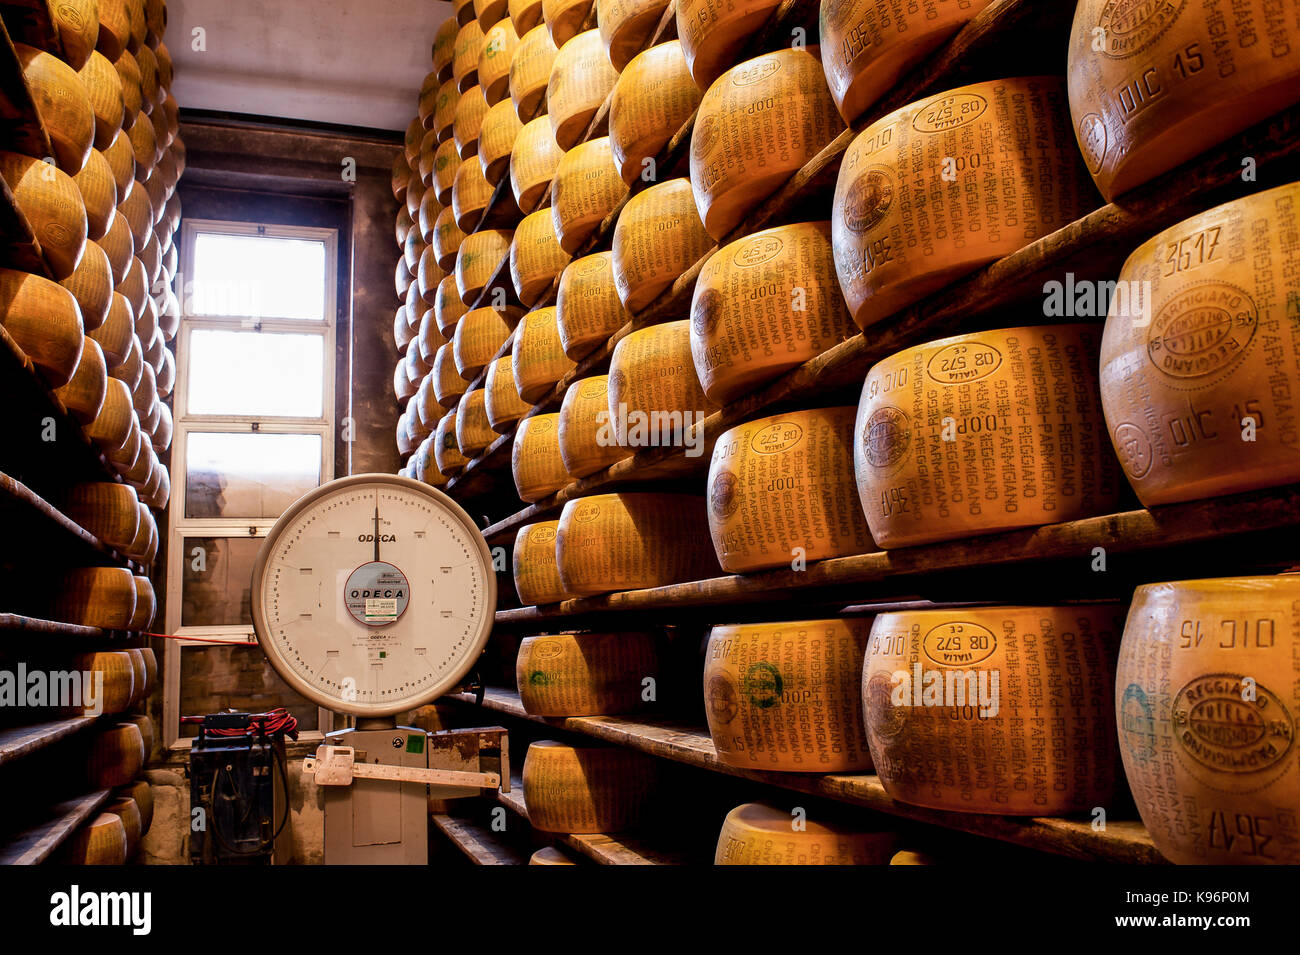 Whole Parmigiano-Reggiano cheeses sit on storage racks during the aging process next to big balance to weight them Stock Photo